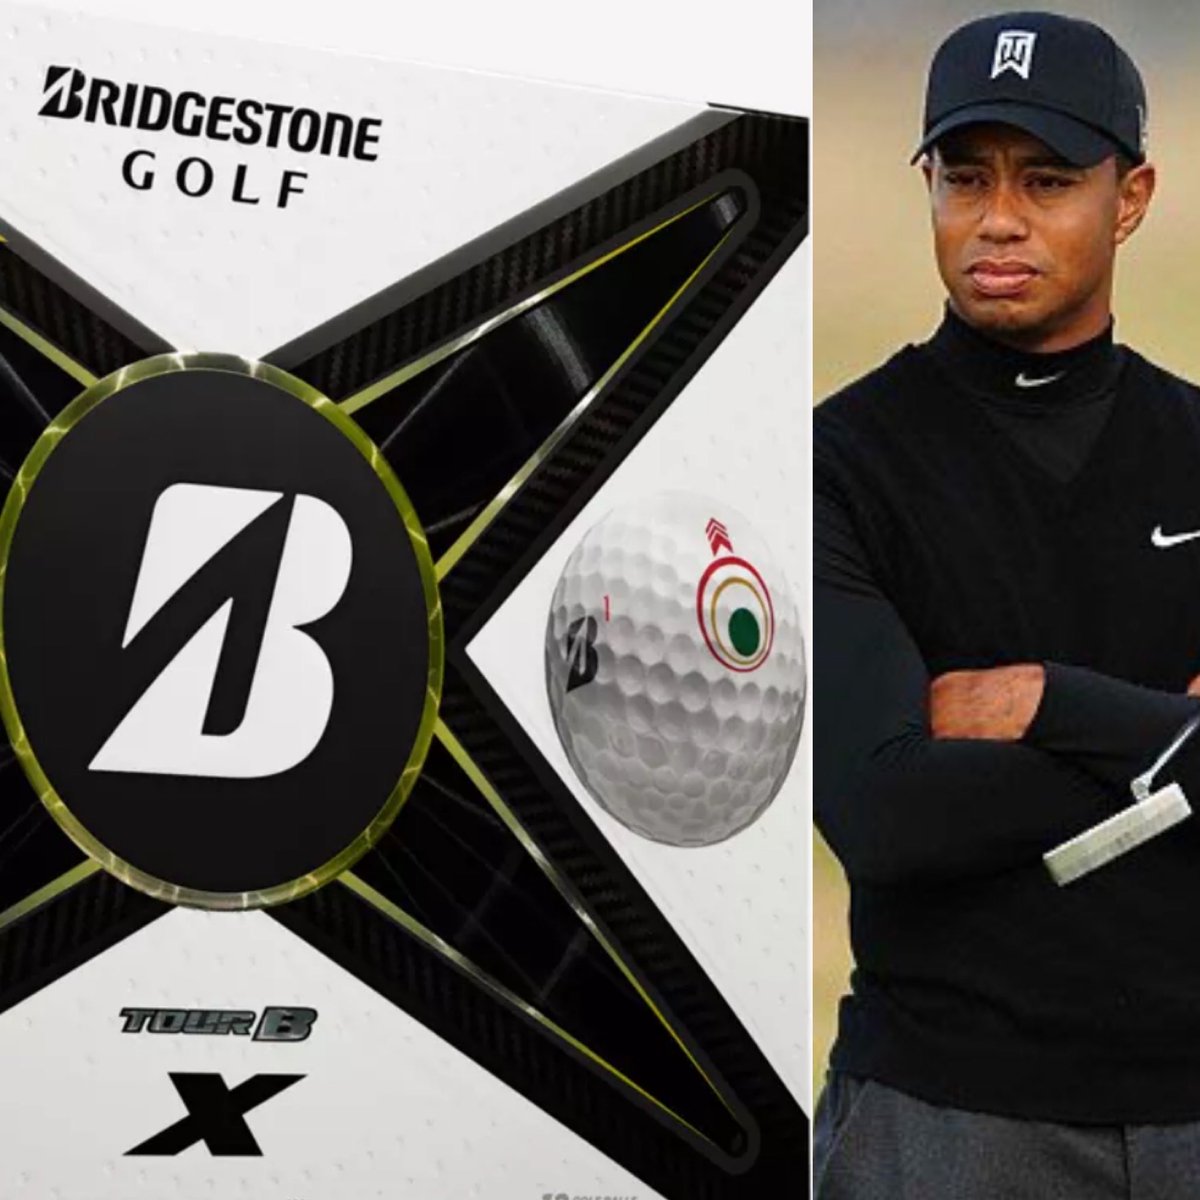 Tiger switches to Bridgestone Tour BX for ⁦@TheMasters⁩ featuring Mindset. #focustoperform